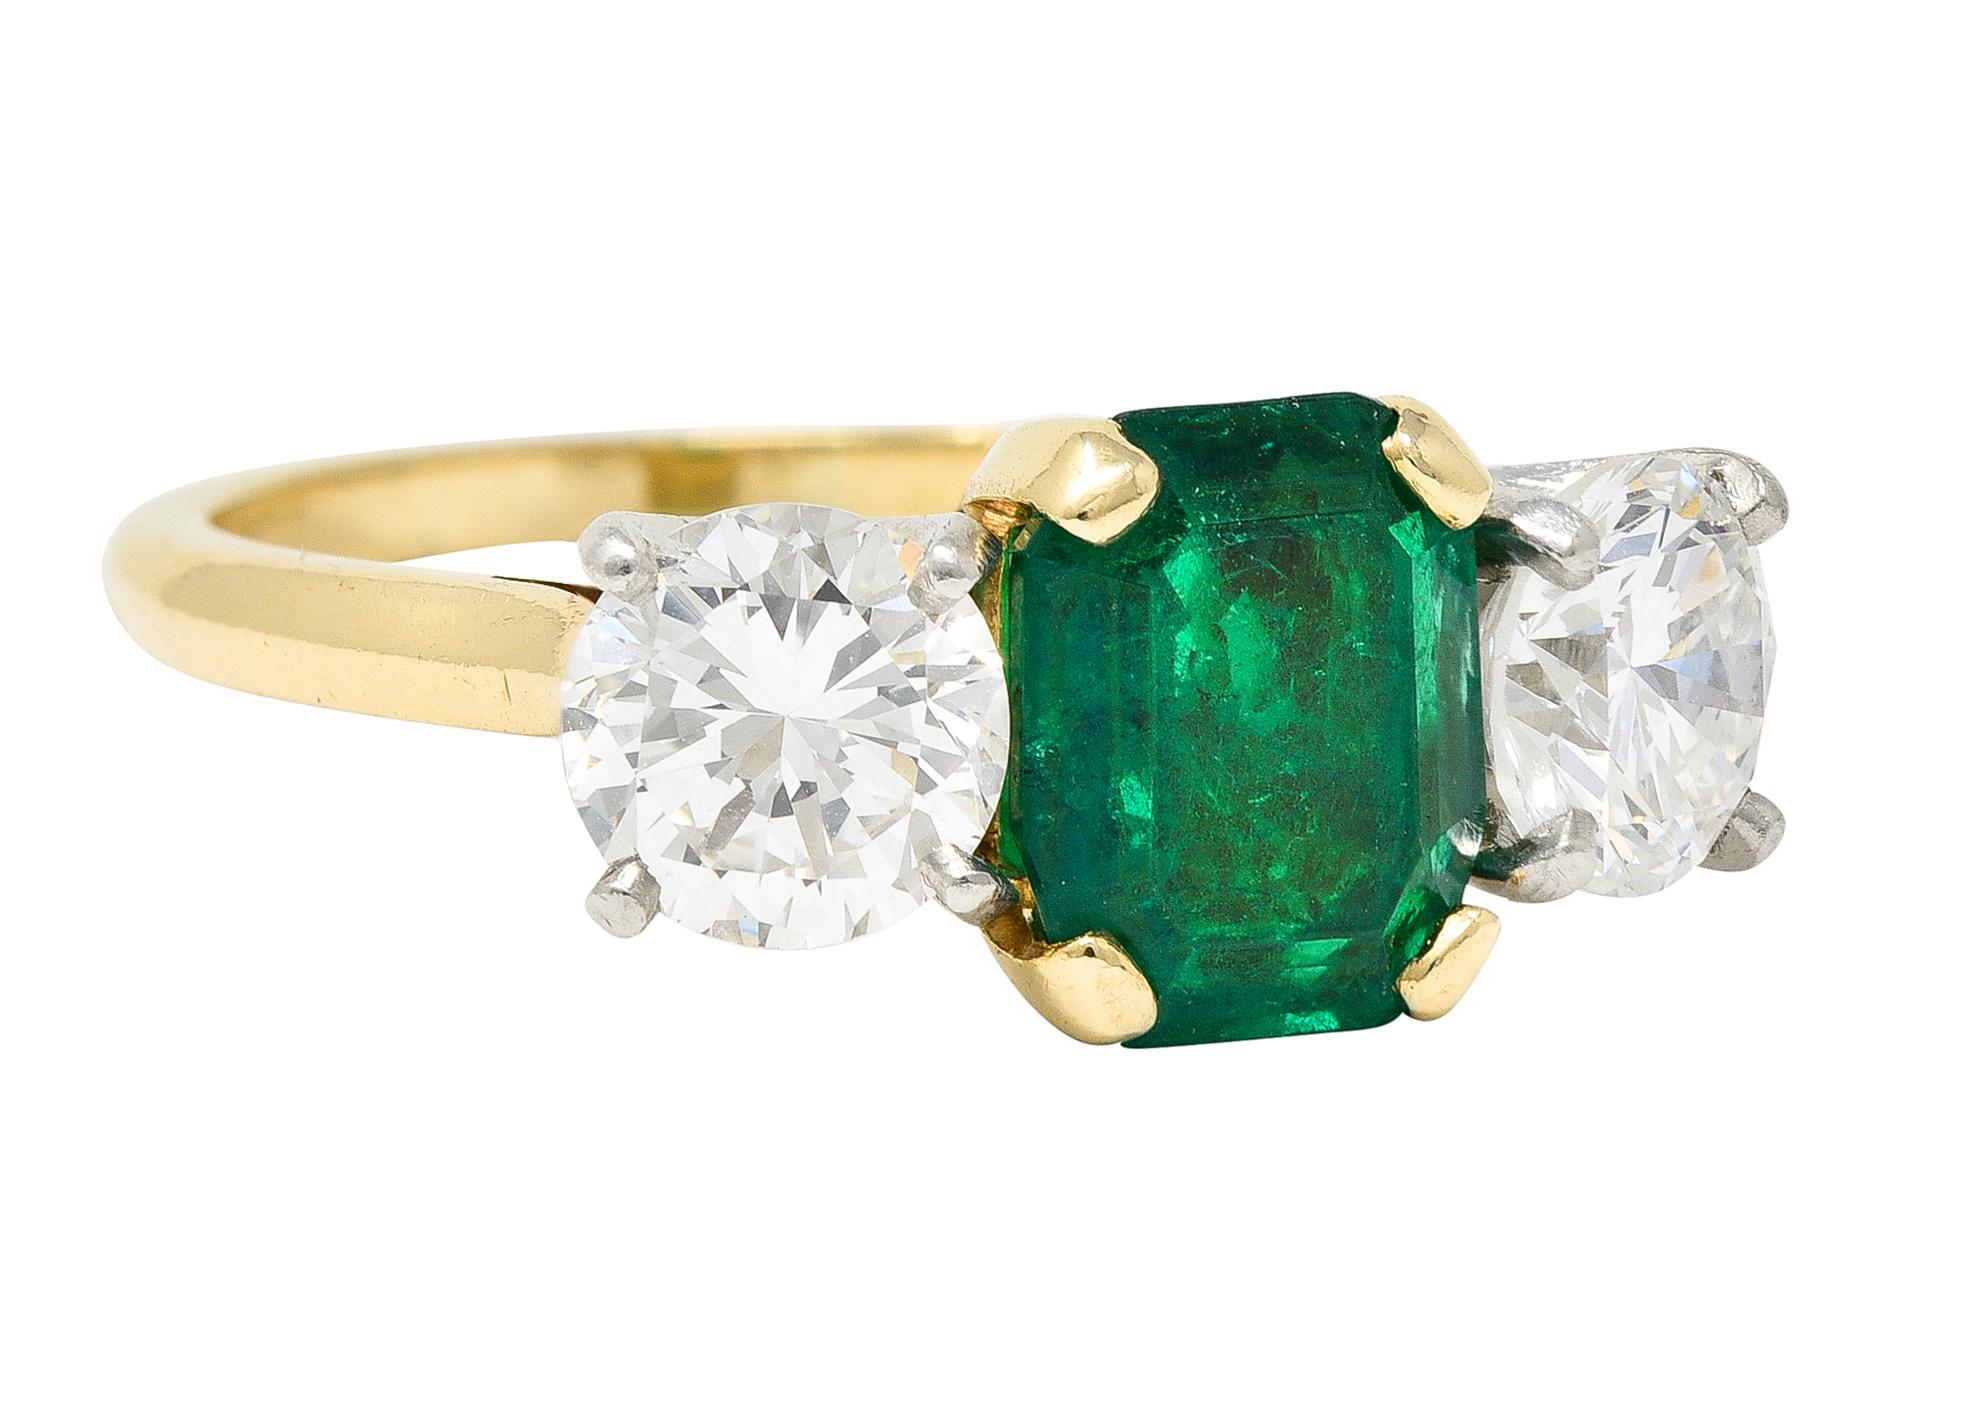 Centering an emerald cut emerald weighing approximately 1.67 carats - transparent medium green in color
Natural Colombian in origin with F2 moderate clarity enhancement
Prong set in a gold basket and flanked by round brilliant cut diamonds
Weighing